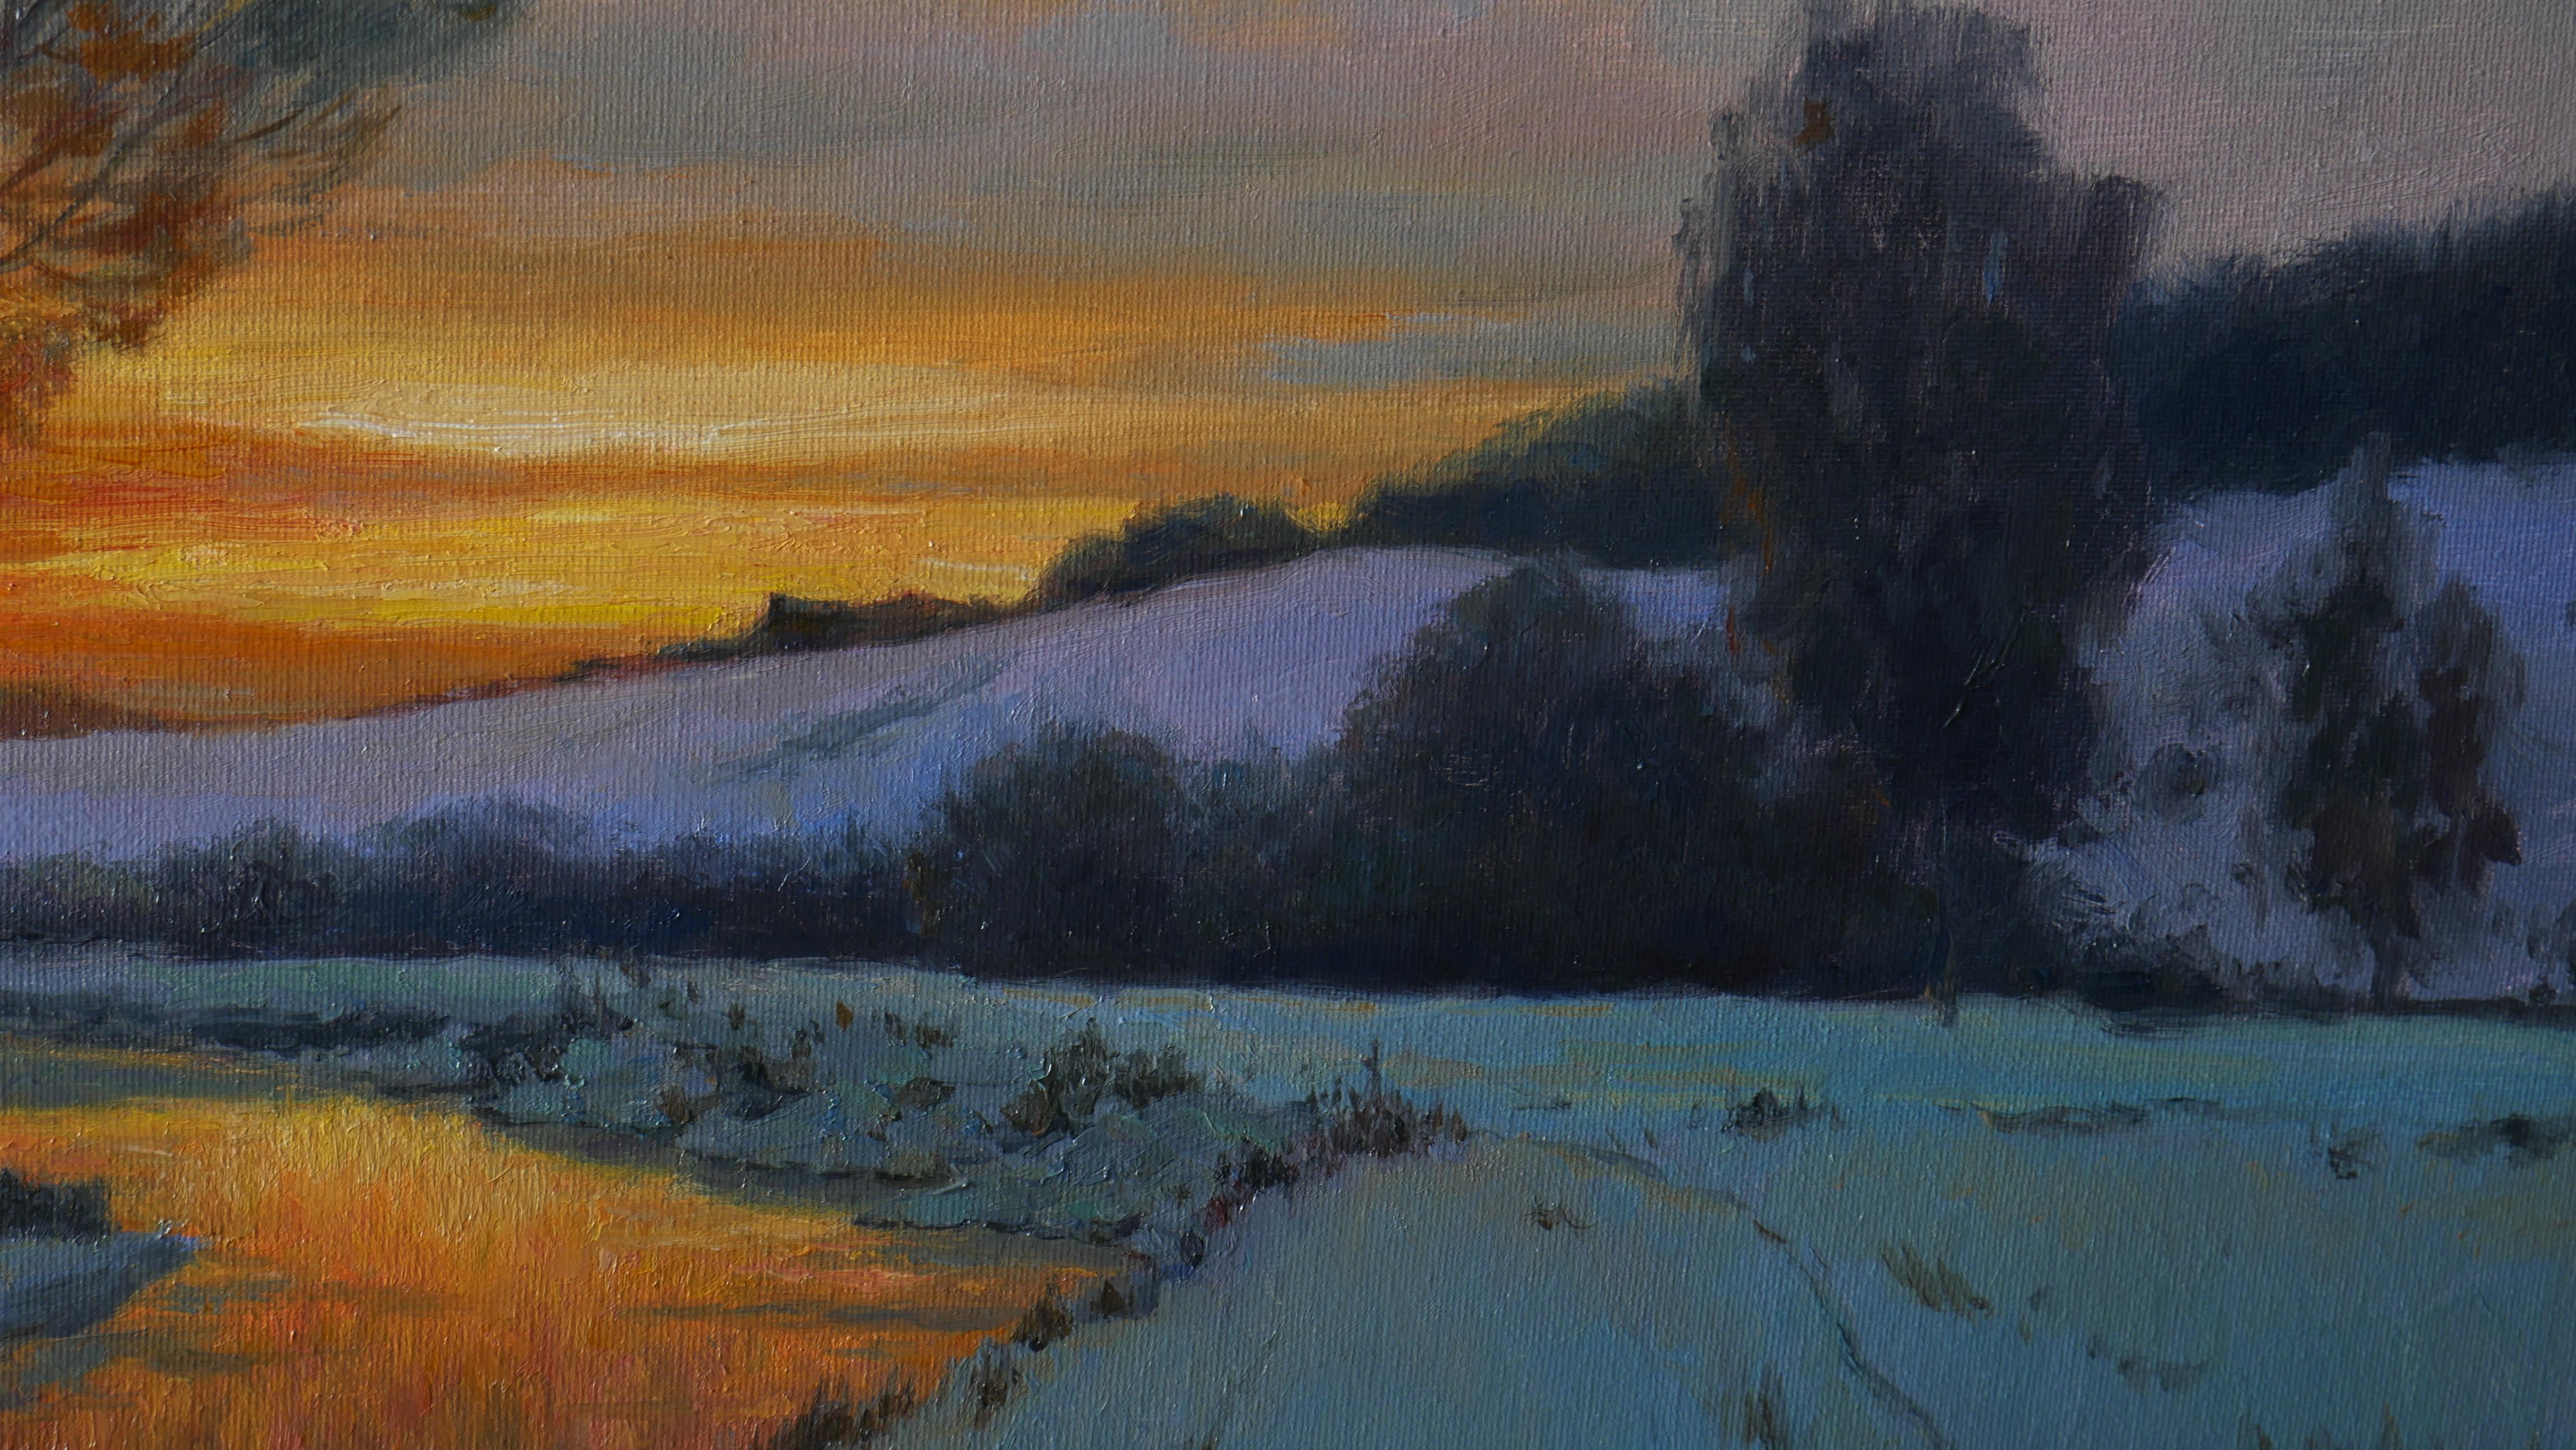 Fleeting - winter evening landscape painting For Sale 3